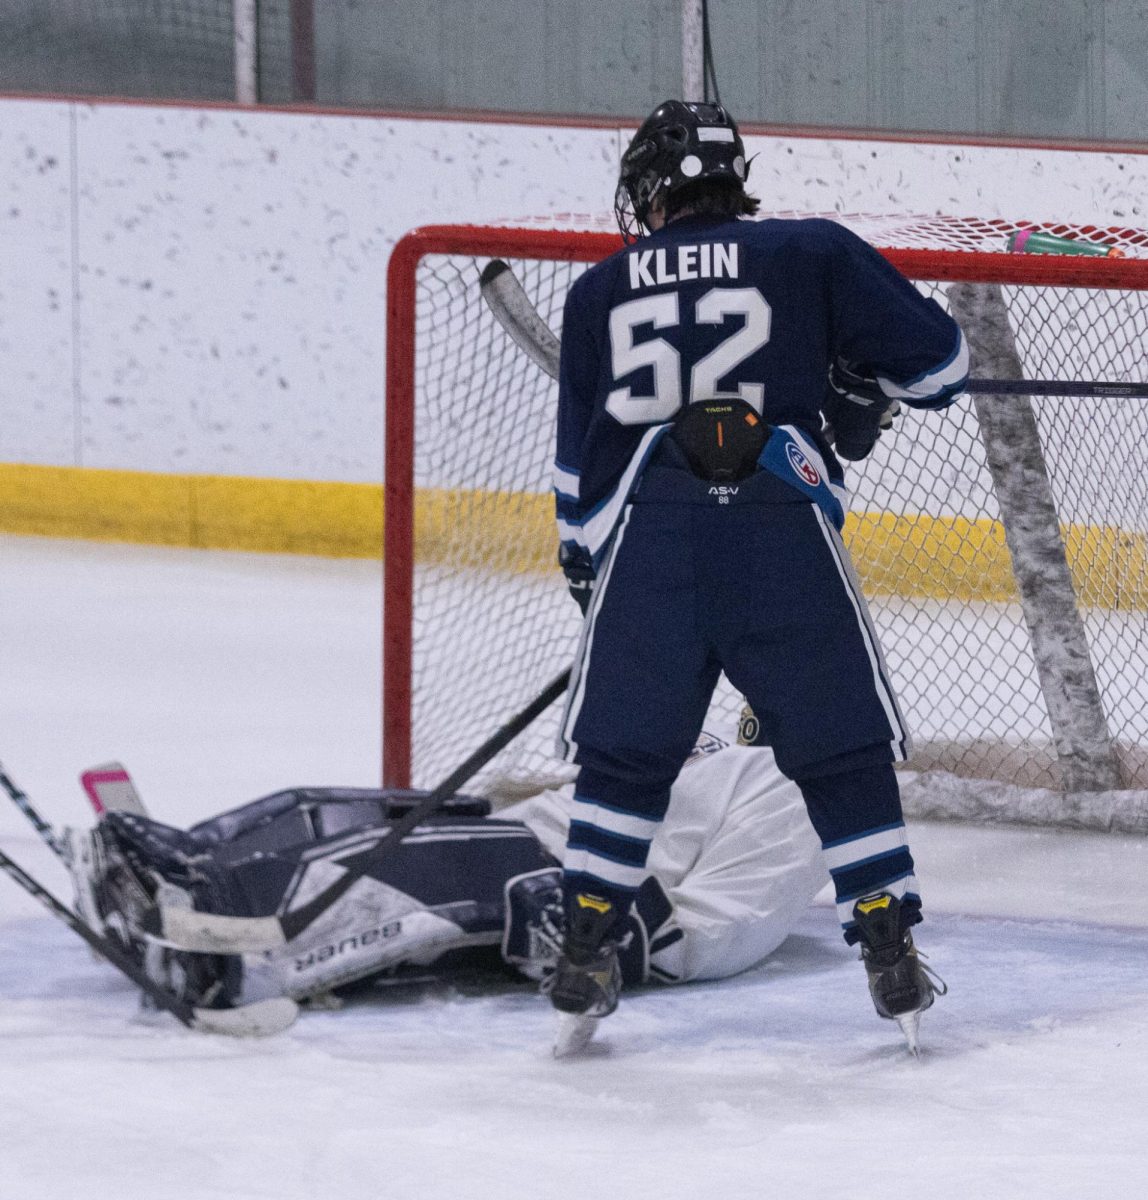 Fisher Klein nudges his stick at the goalie, hoping to drop the puck in. 